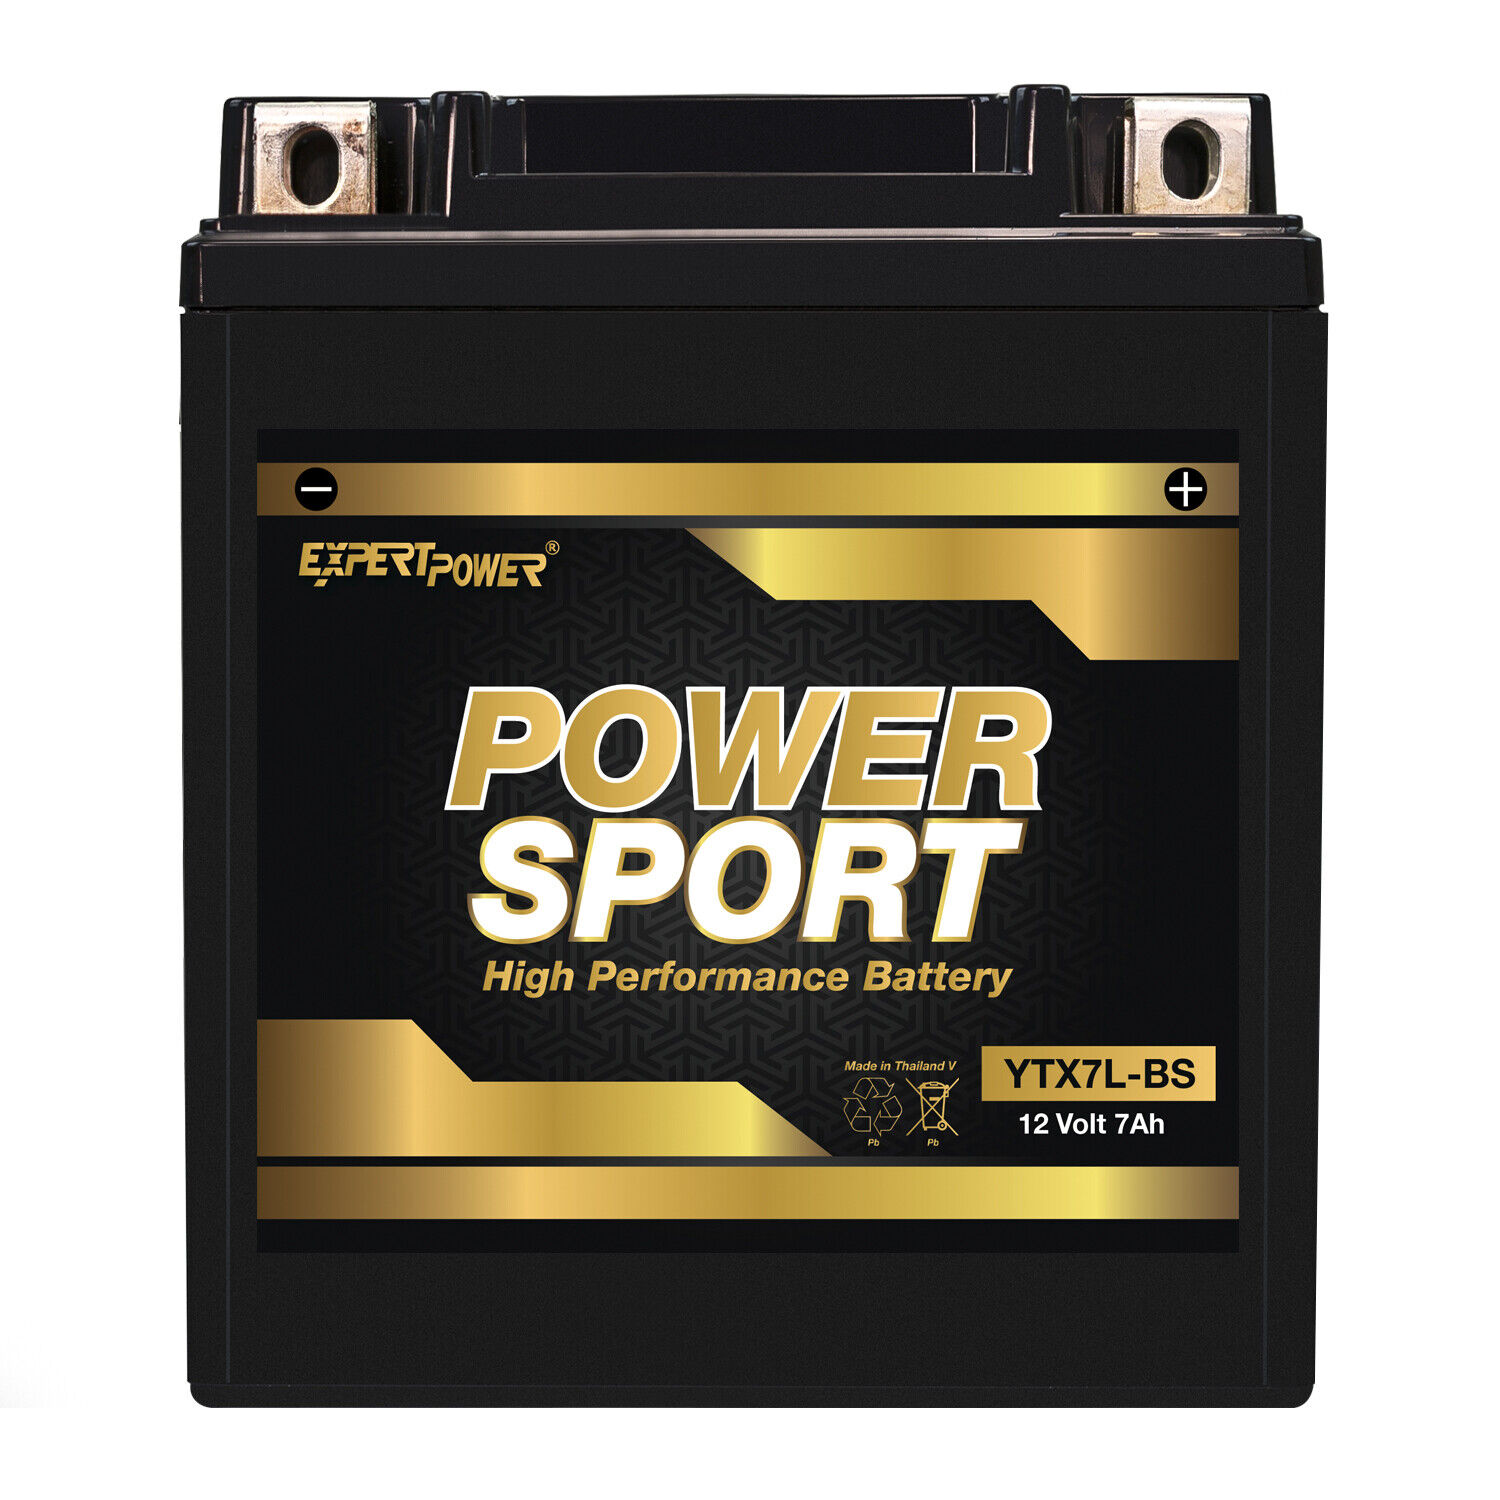 YTX7L-BS 12V 7Ah Battery Replacement for GTX7L-BS, PTX7L-BS, STX7L-BS